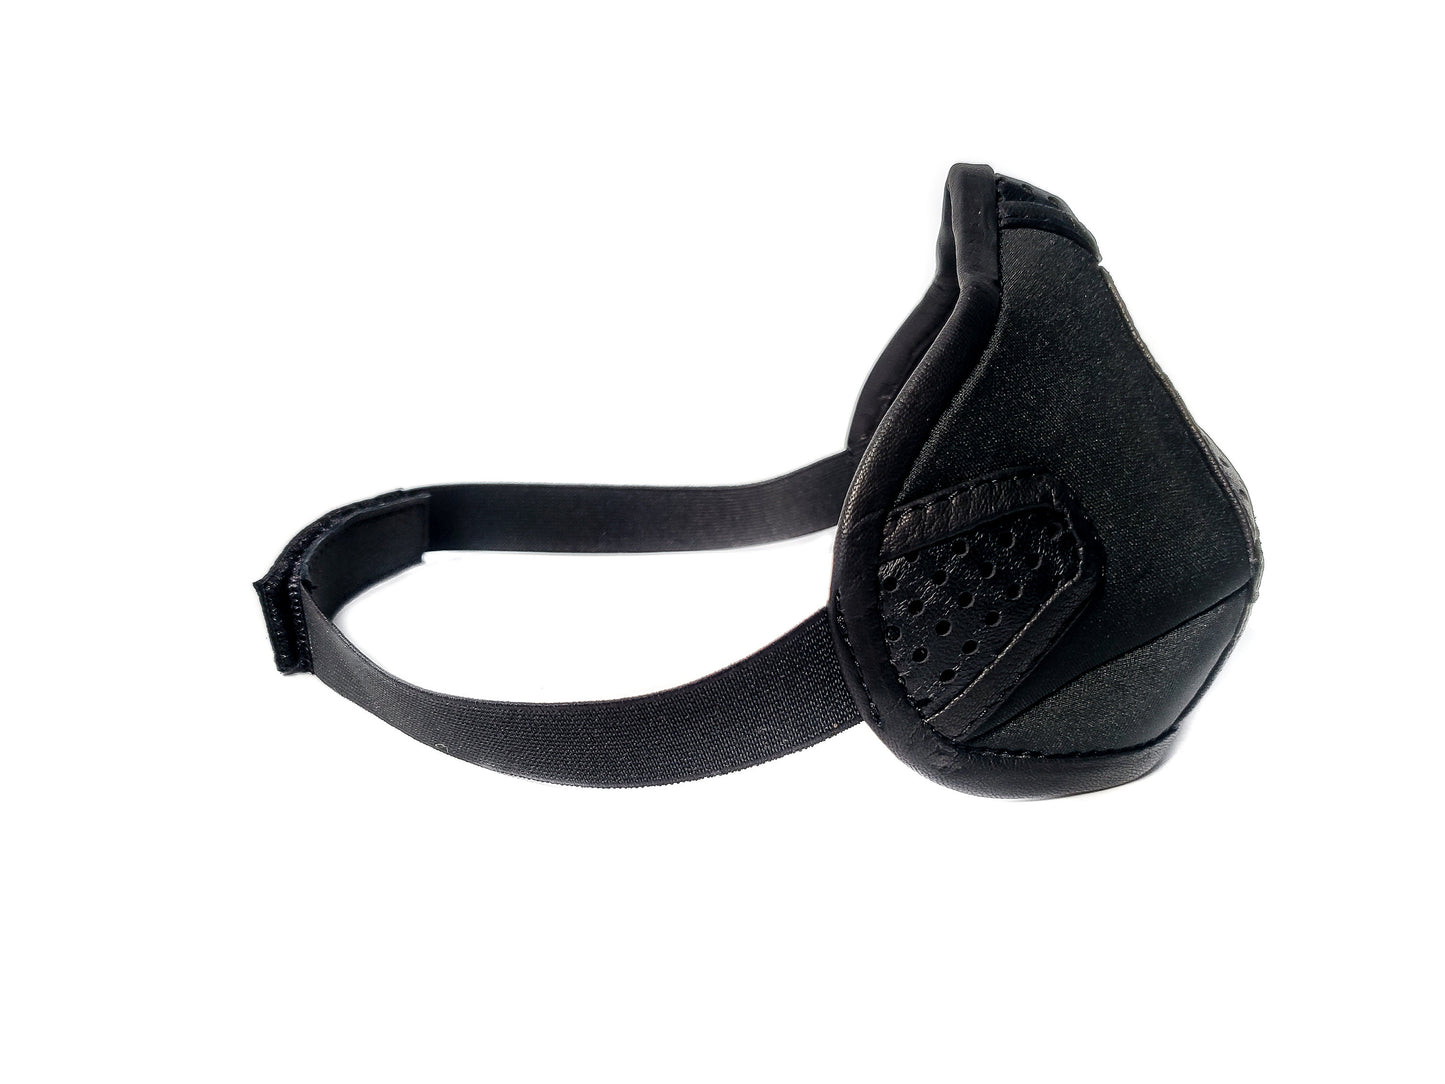 Neoprene and Leather Adjustable Adult Protective Face Mask